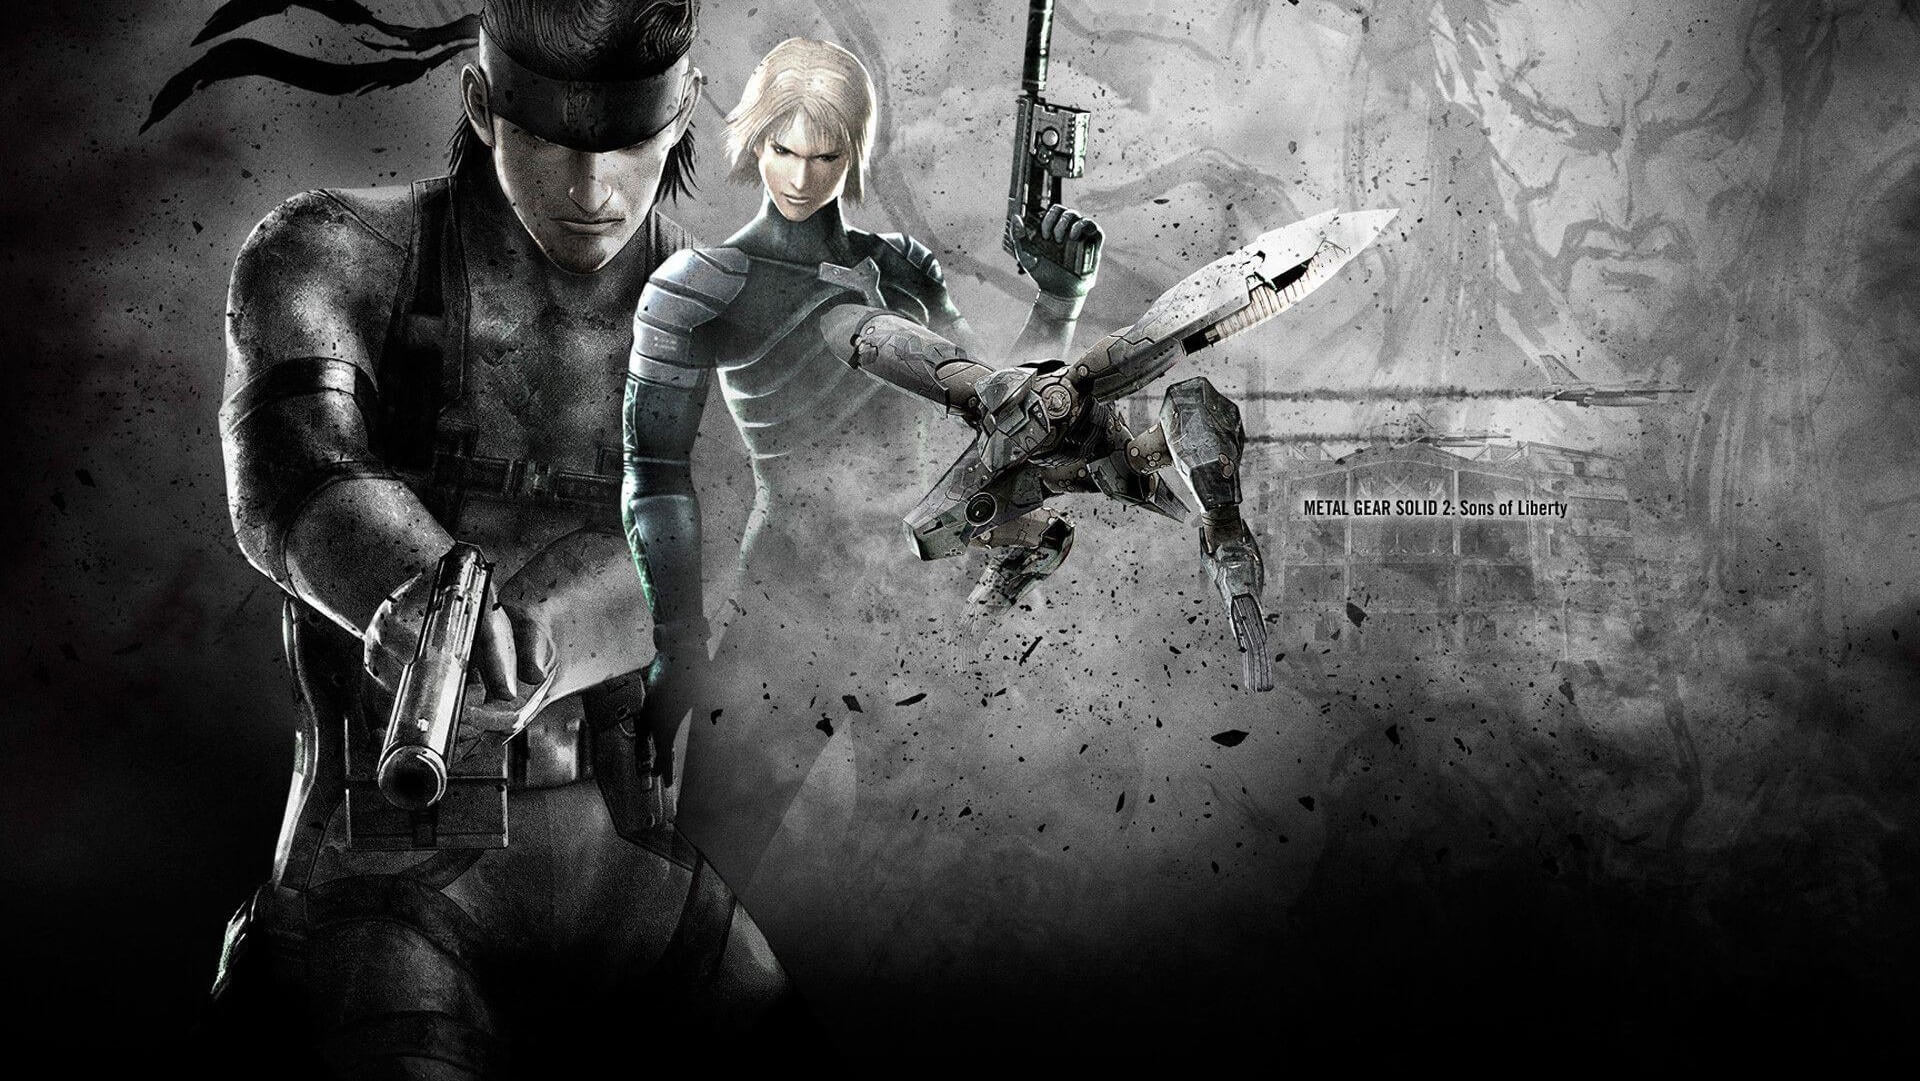 metal-gear-solid-2-hd-remaster-is-already-available-on-pc-via-emulation